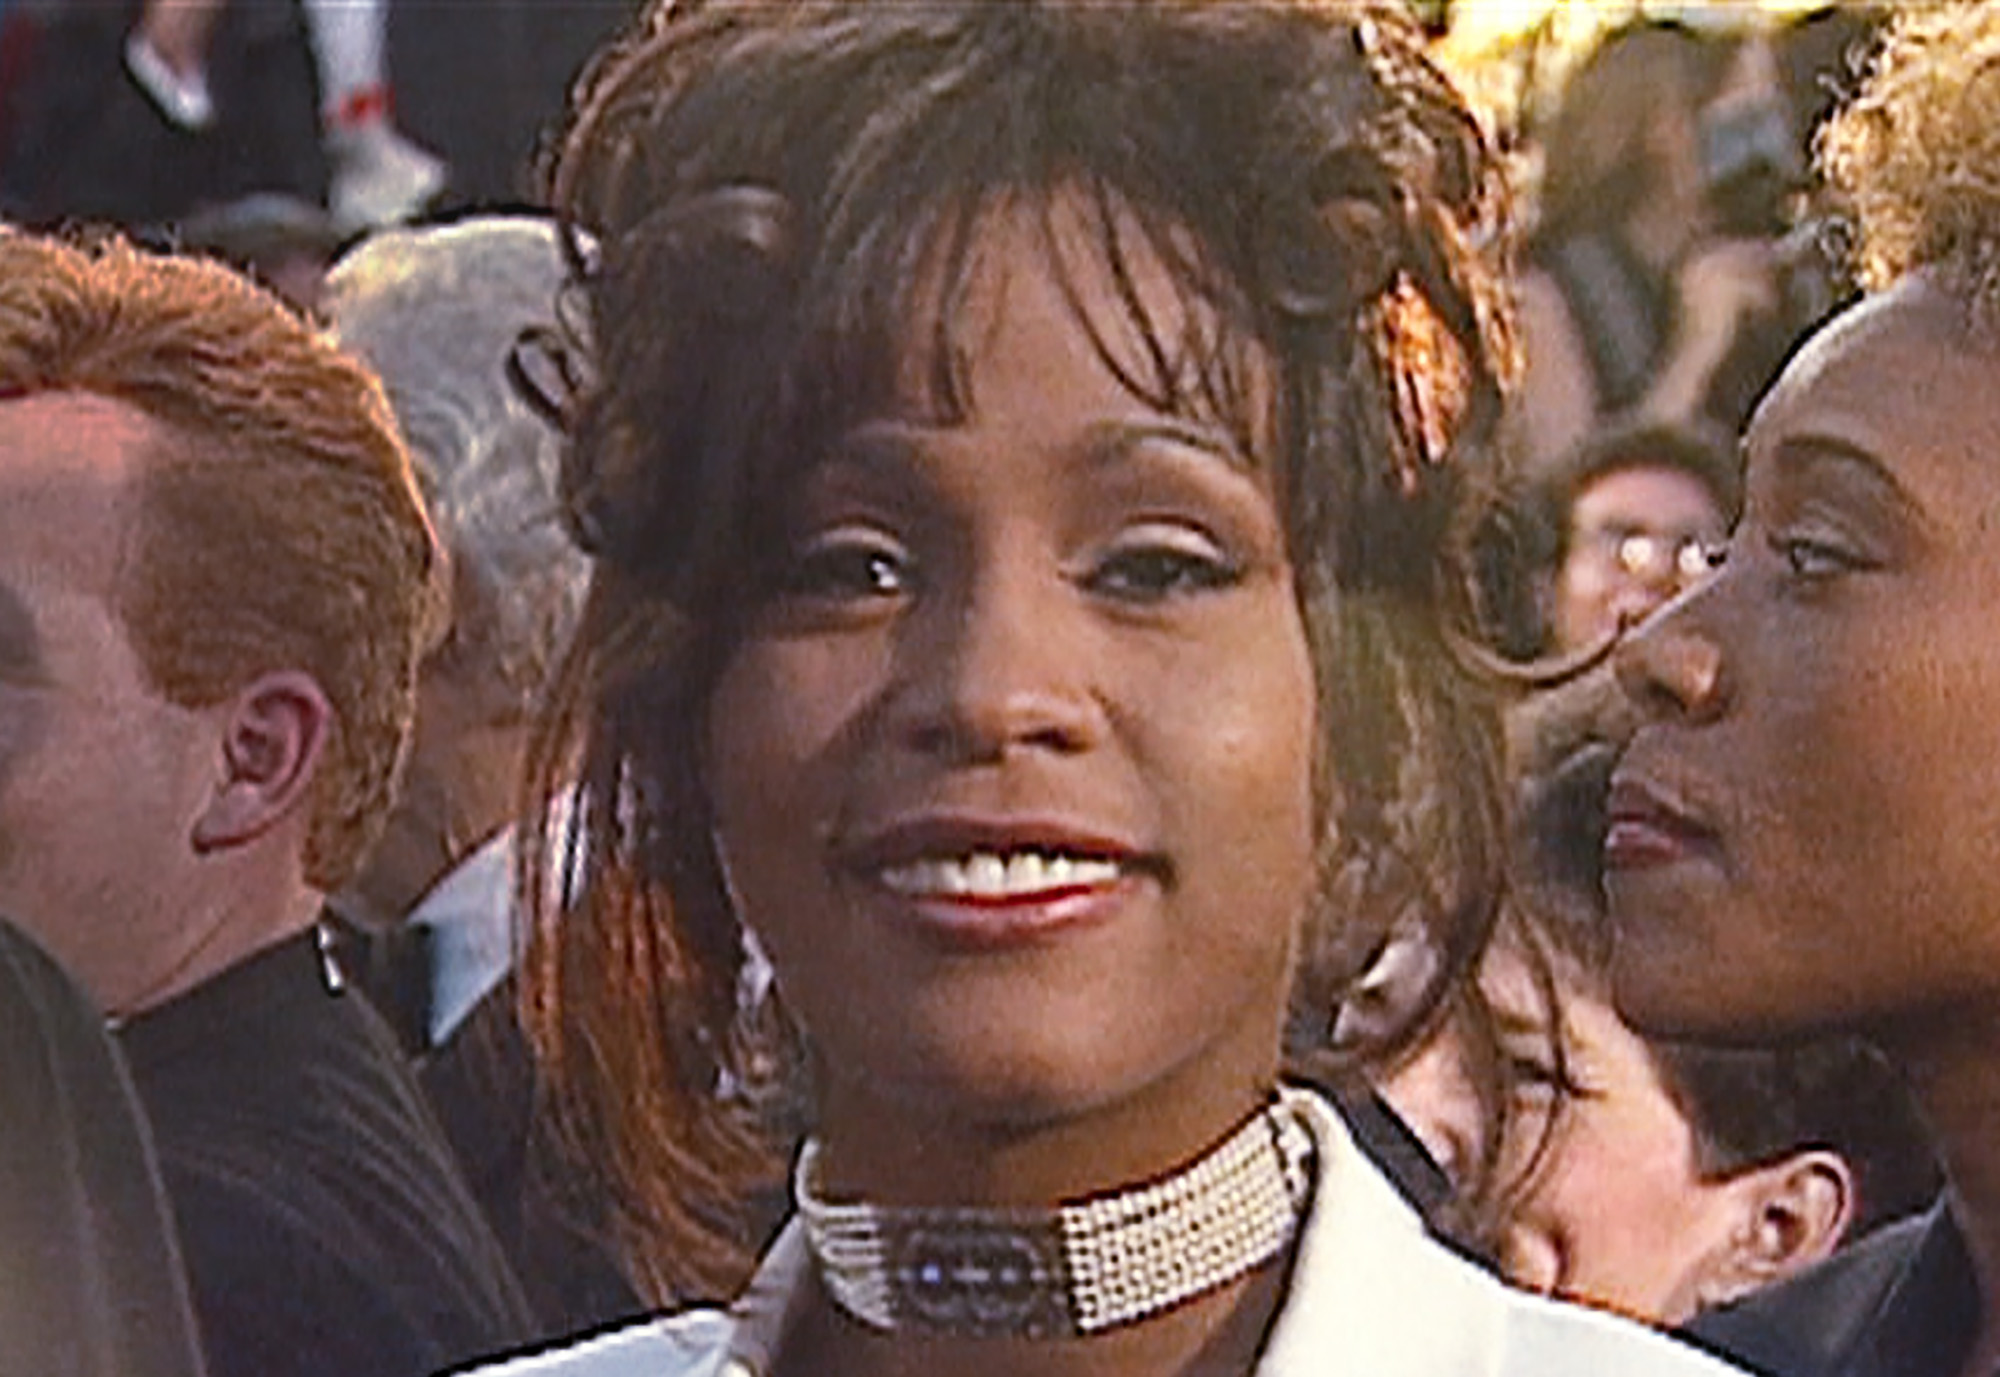 WHITNEY. "CAN I BE ME